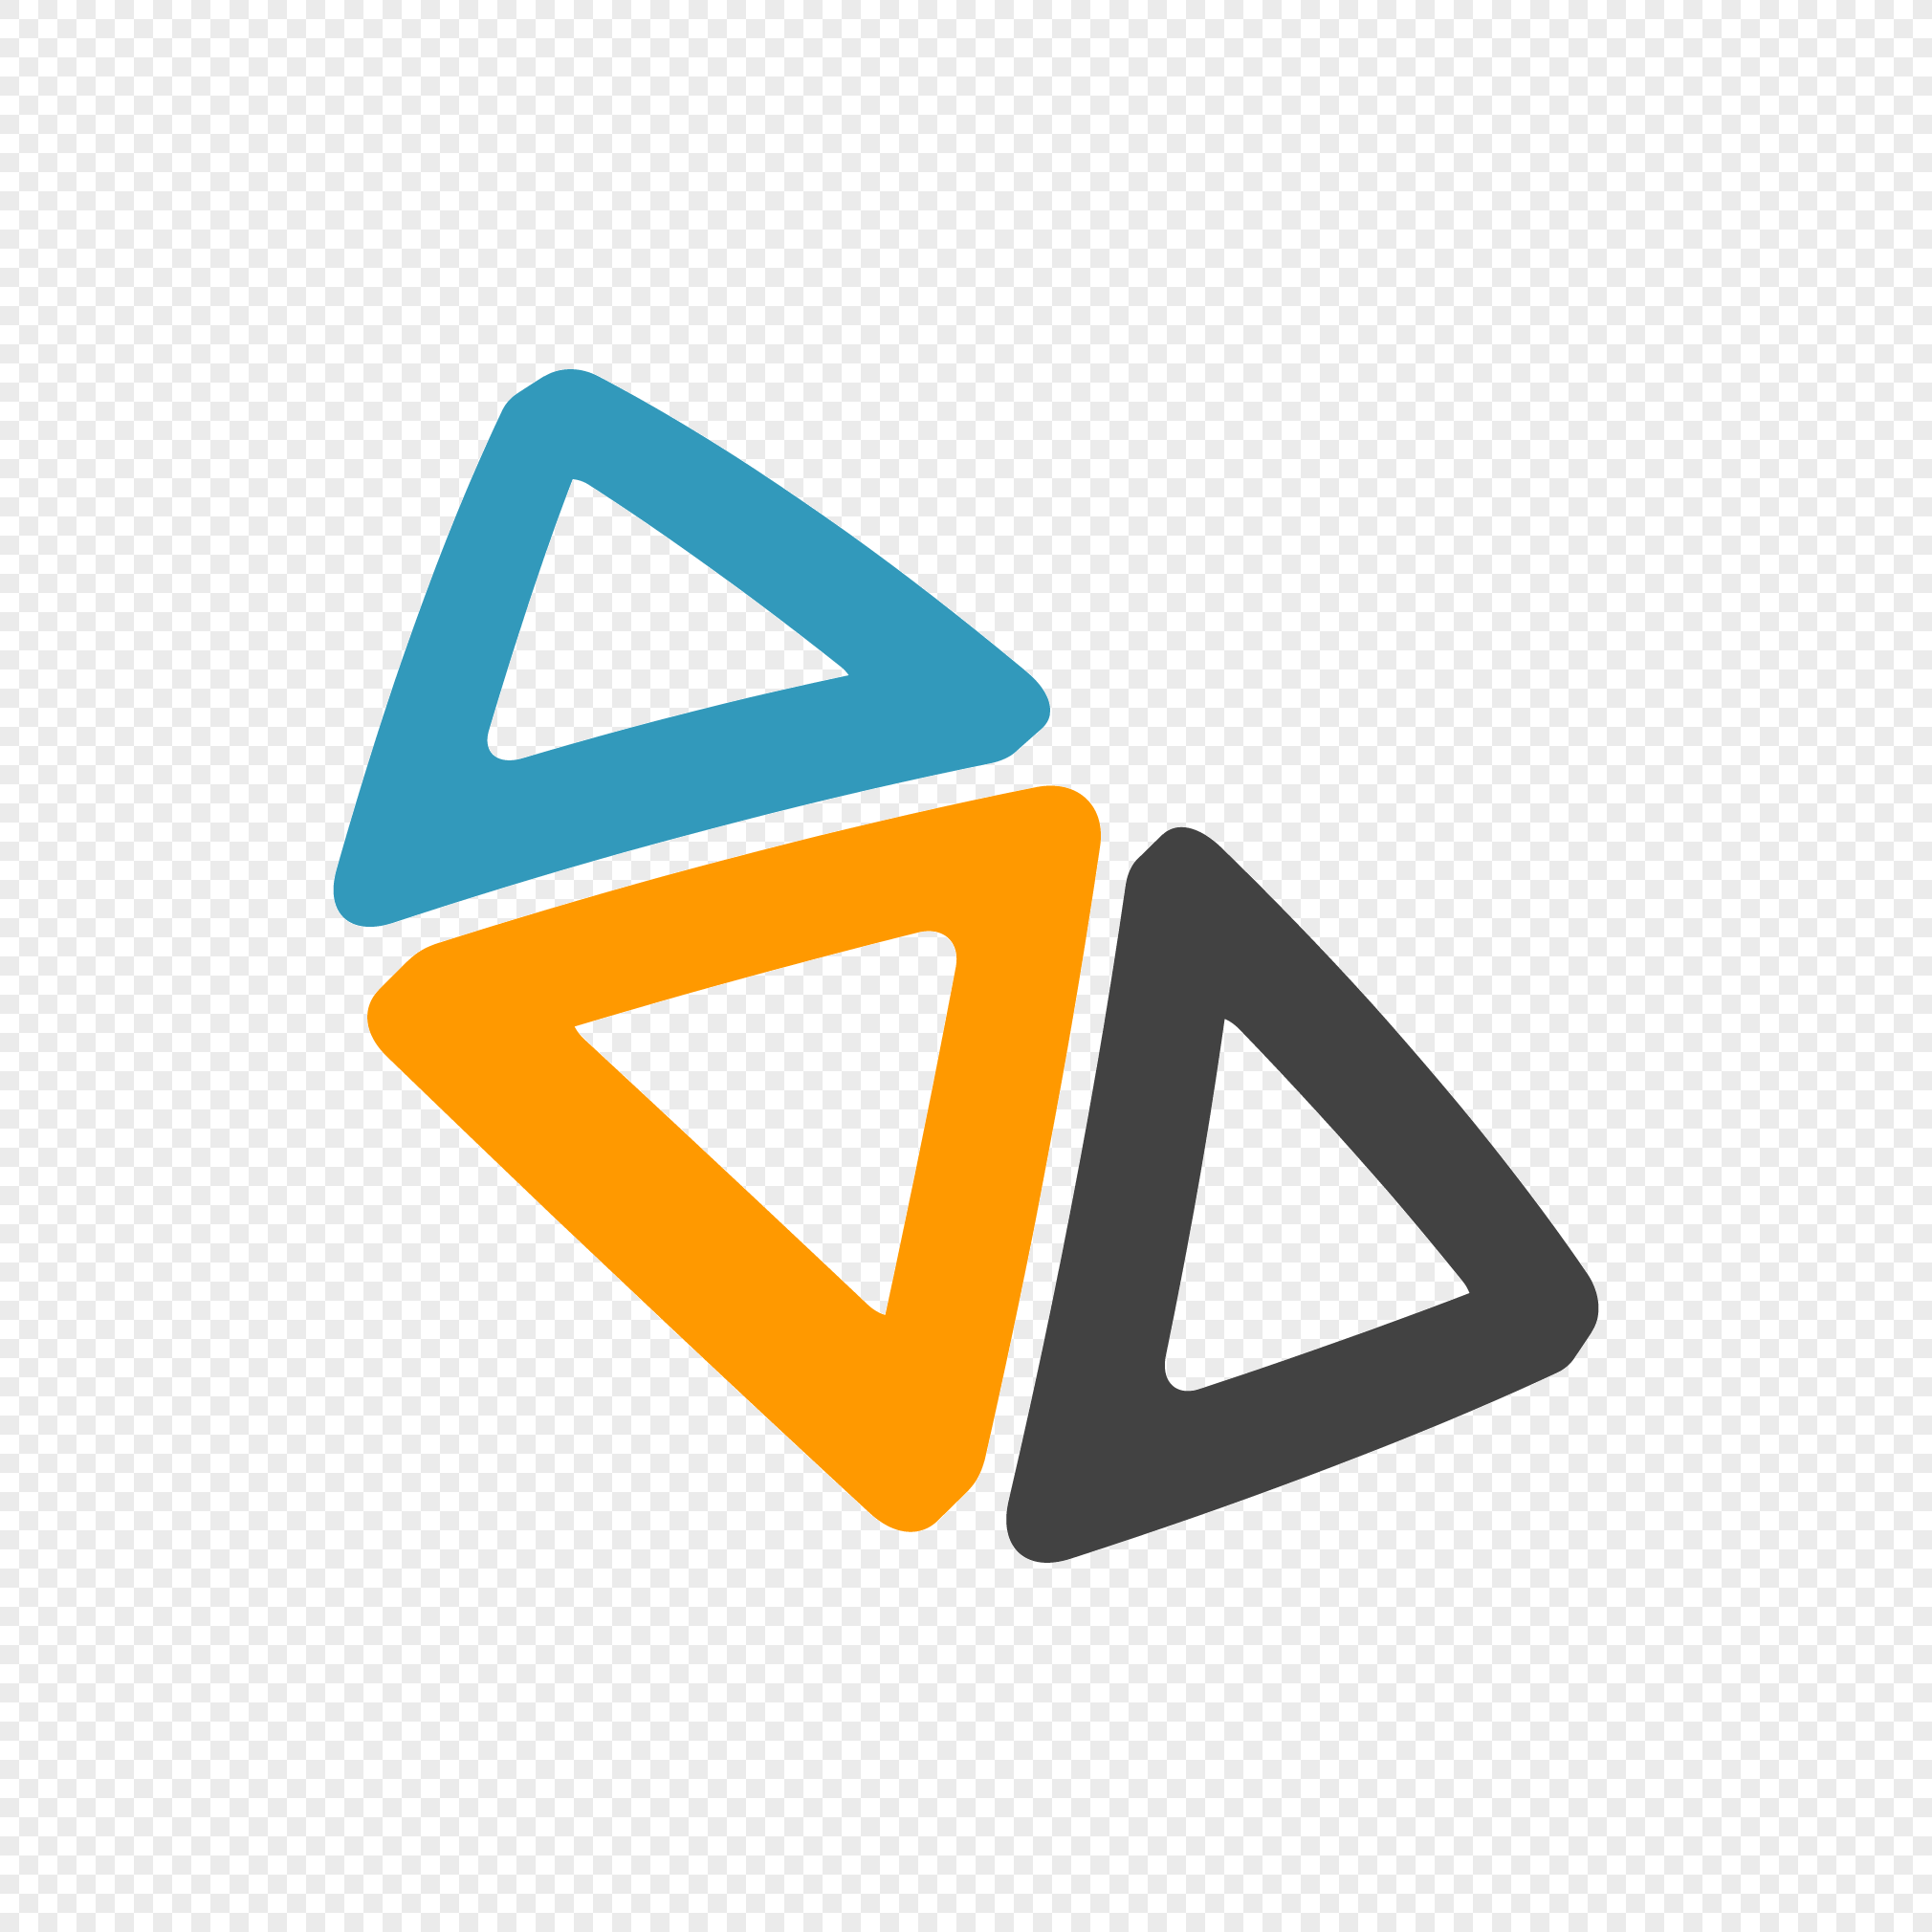 Tricolor Triangle Logo - Tricolor triangle png image_picture free download 400628494_lovepik.com